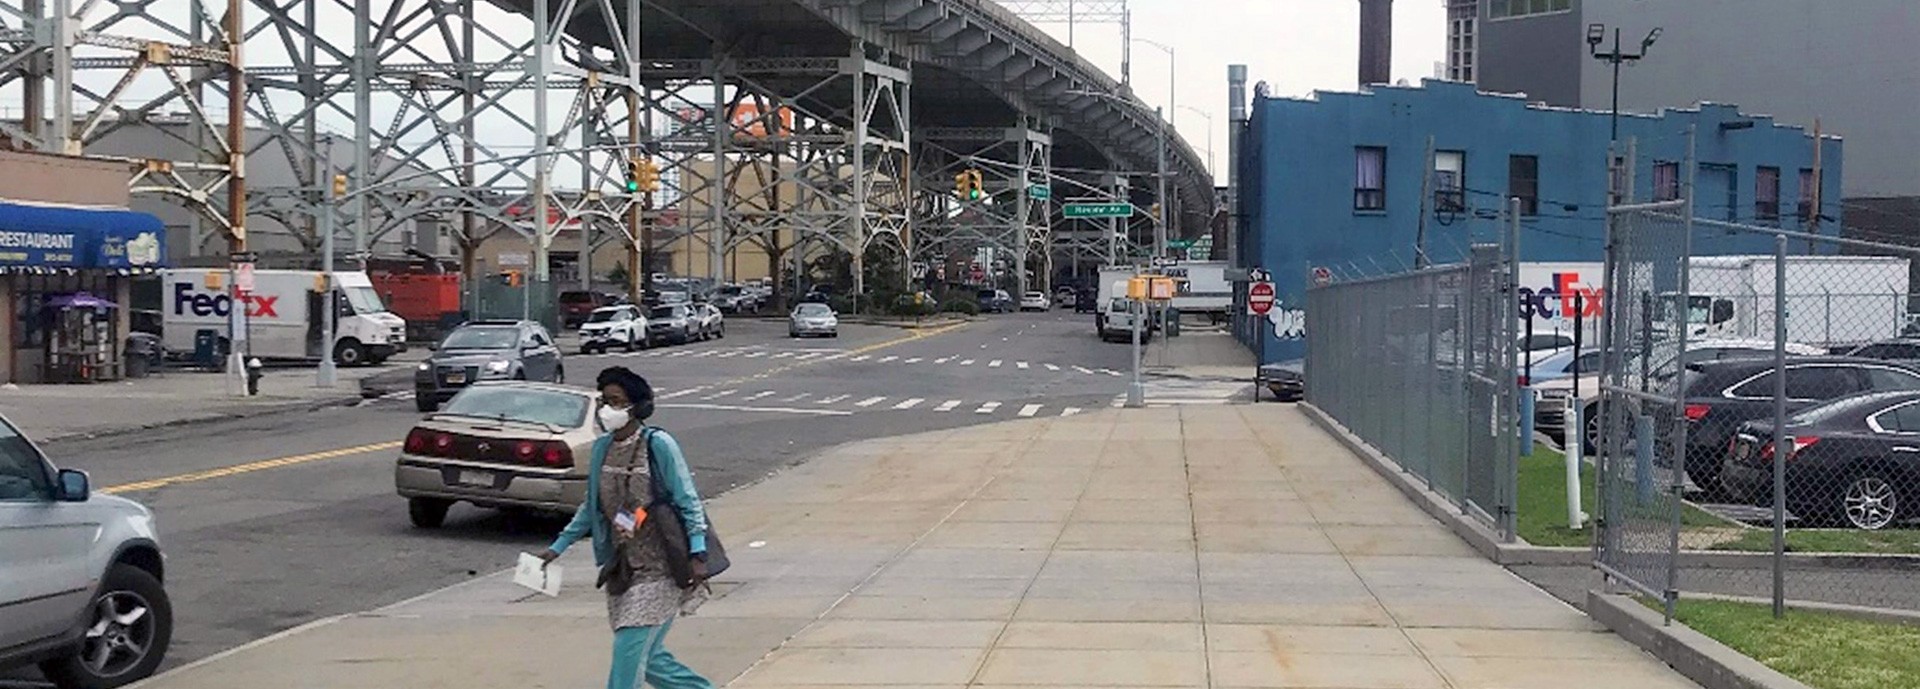 view from sidewalk under large bridge in the nyc area and woman walking on sidewalk